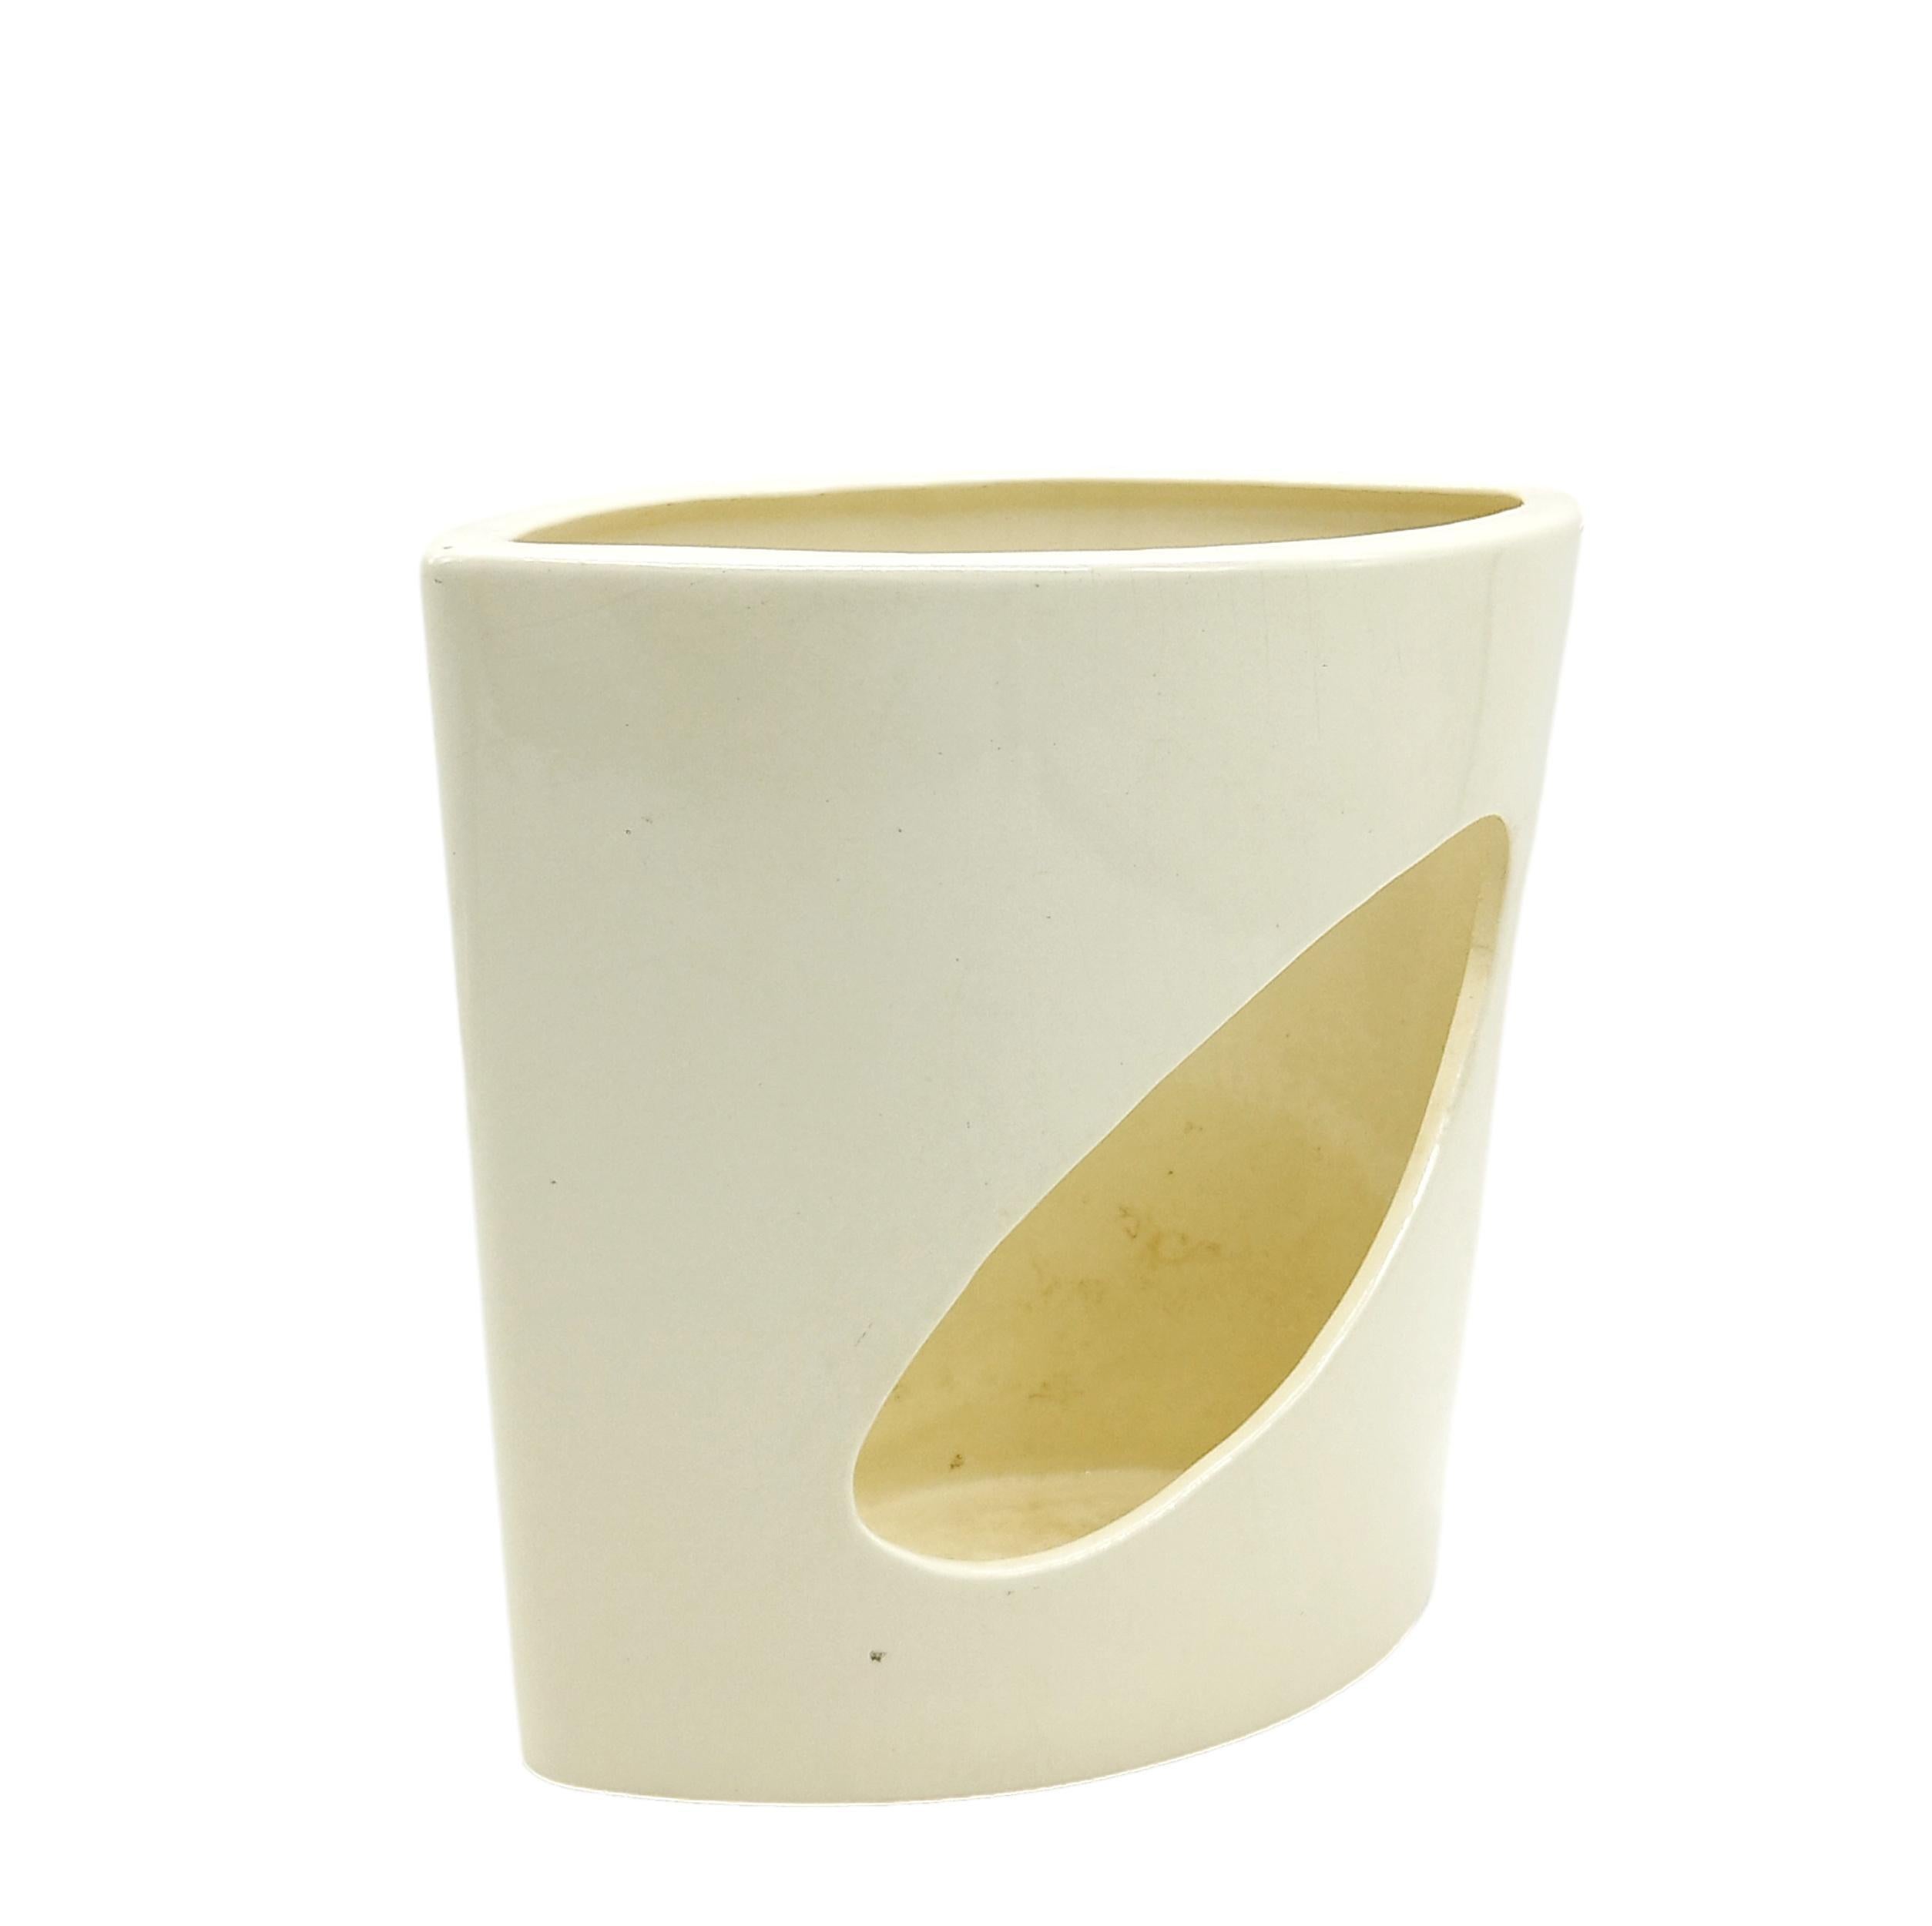 Ivory glazed ceramic cachepot in the style of Antonia Campi, Italy, 1970.